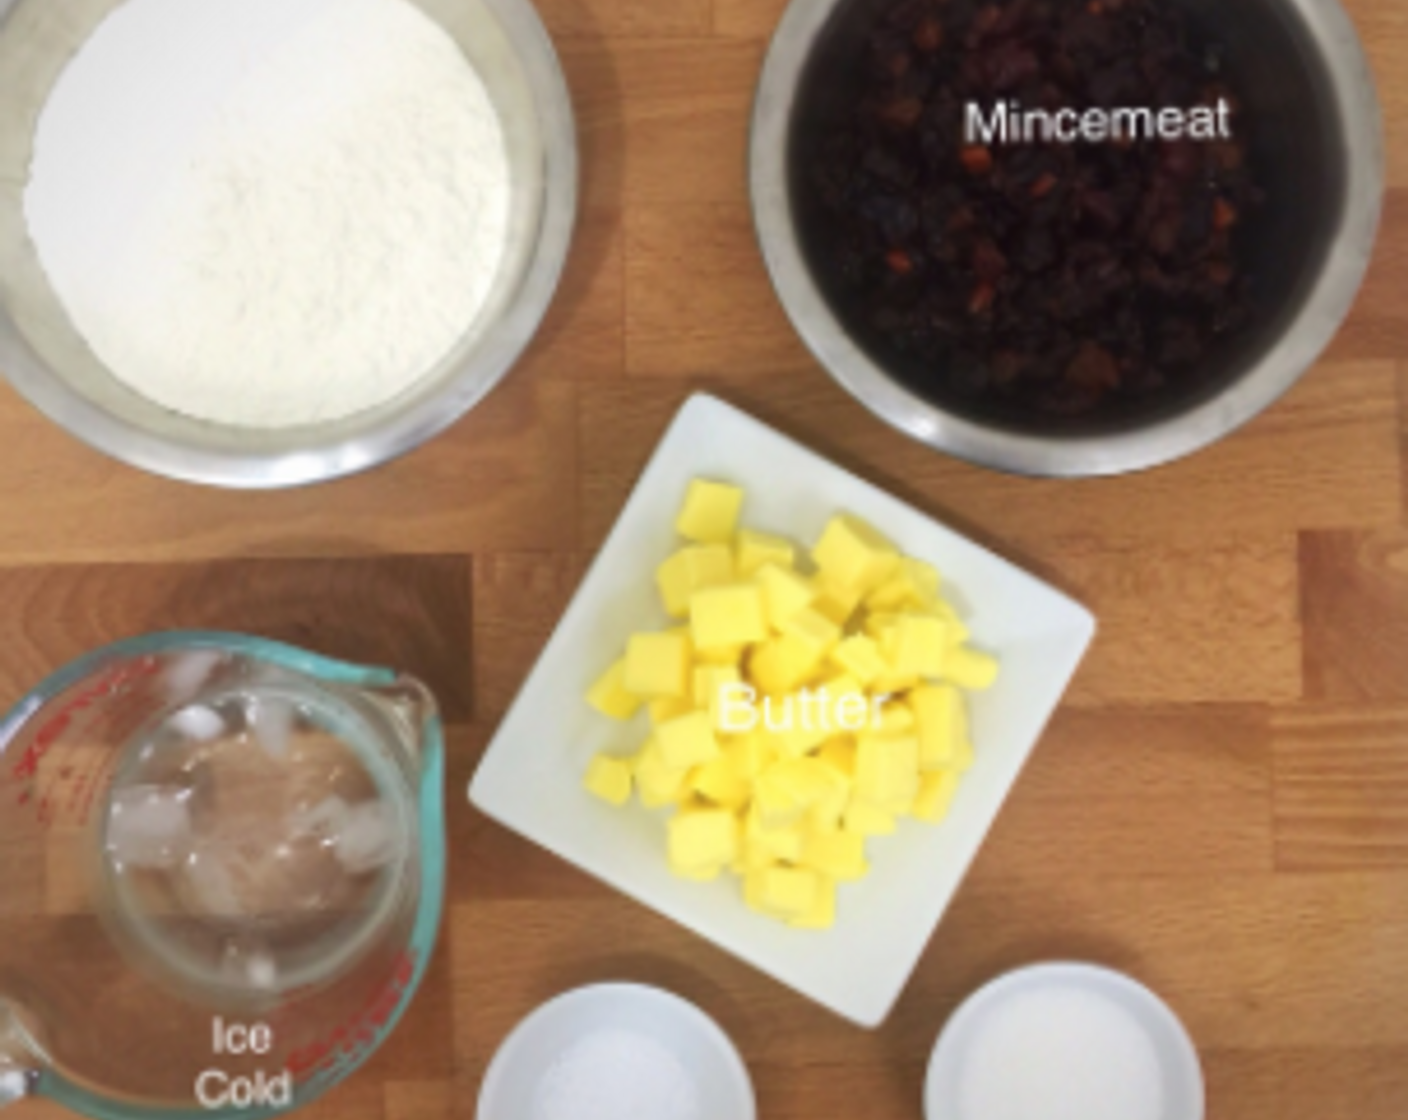 step 1 First, have ready all ingredients needed including All-Purpose Flour (1 1/4 cups), Jarred Fruit Mincemeat (1 cup), Water (3 Tbsp), Salt (1/2 tsp) and Granulated Sugar (1 Tbsp) to make the festive mince pies.